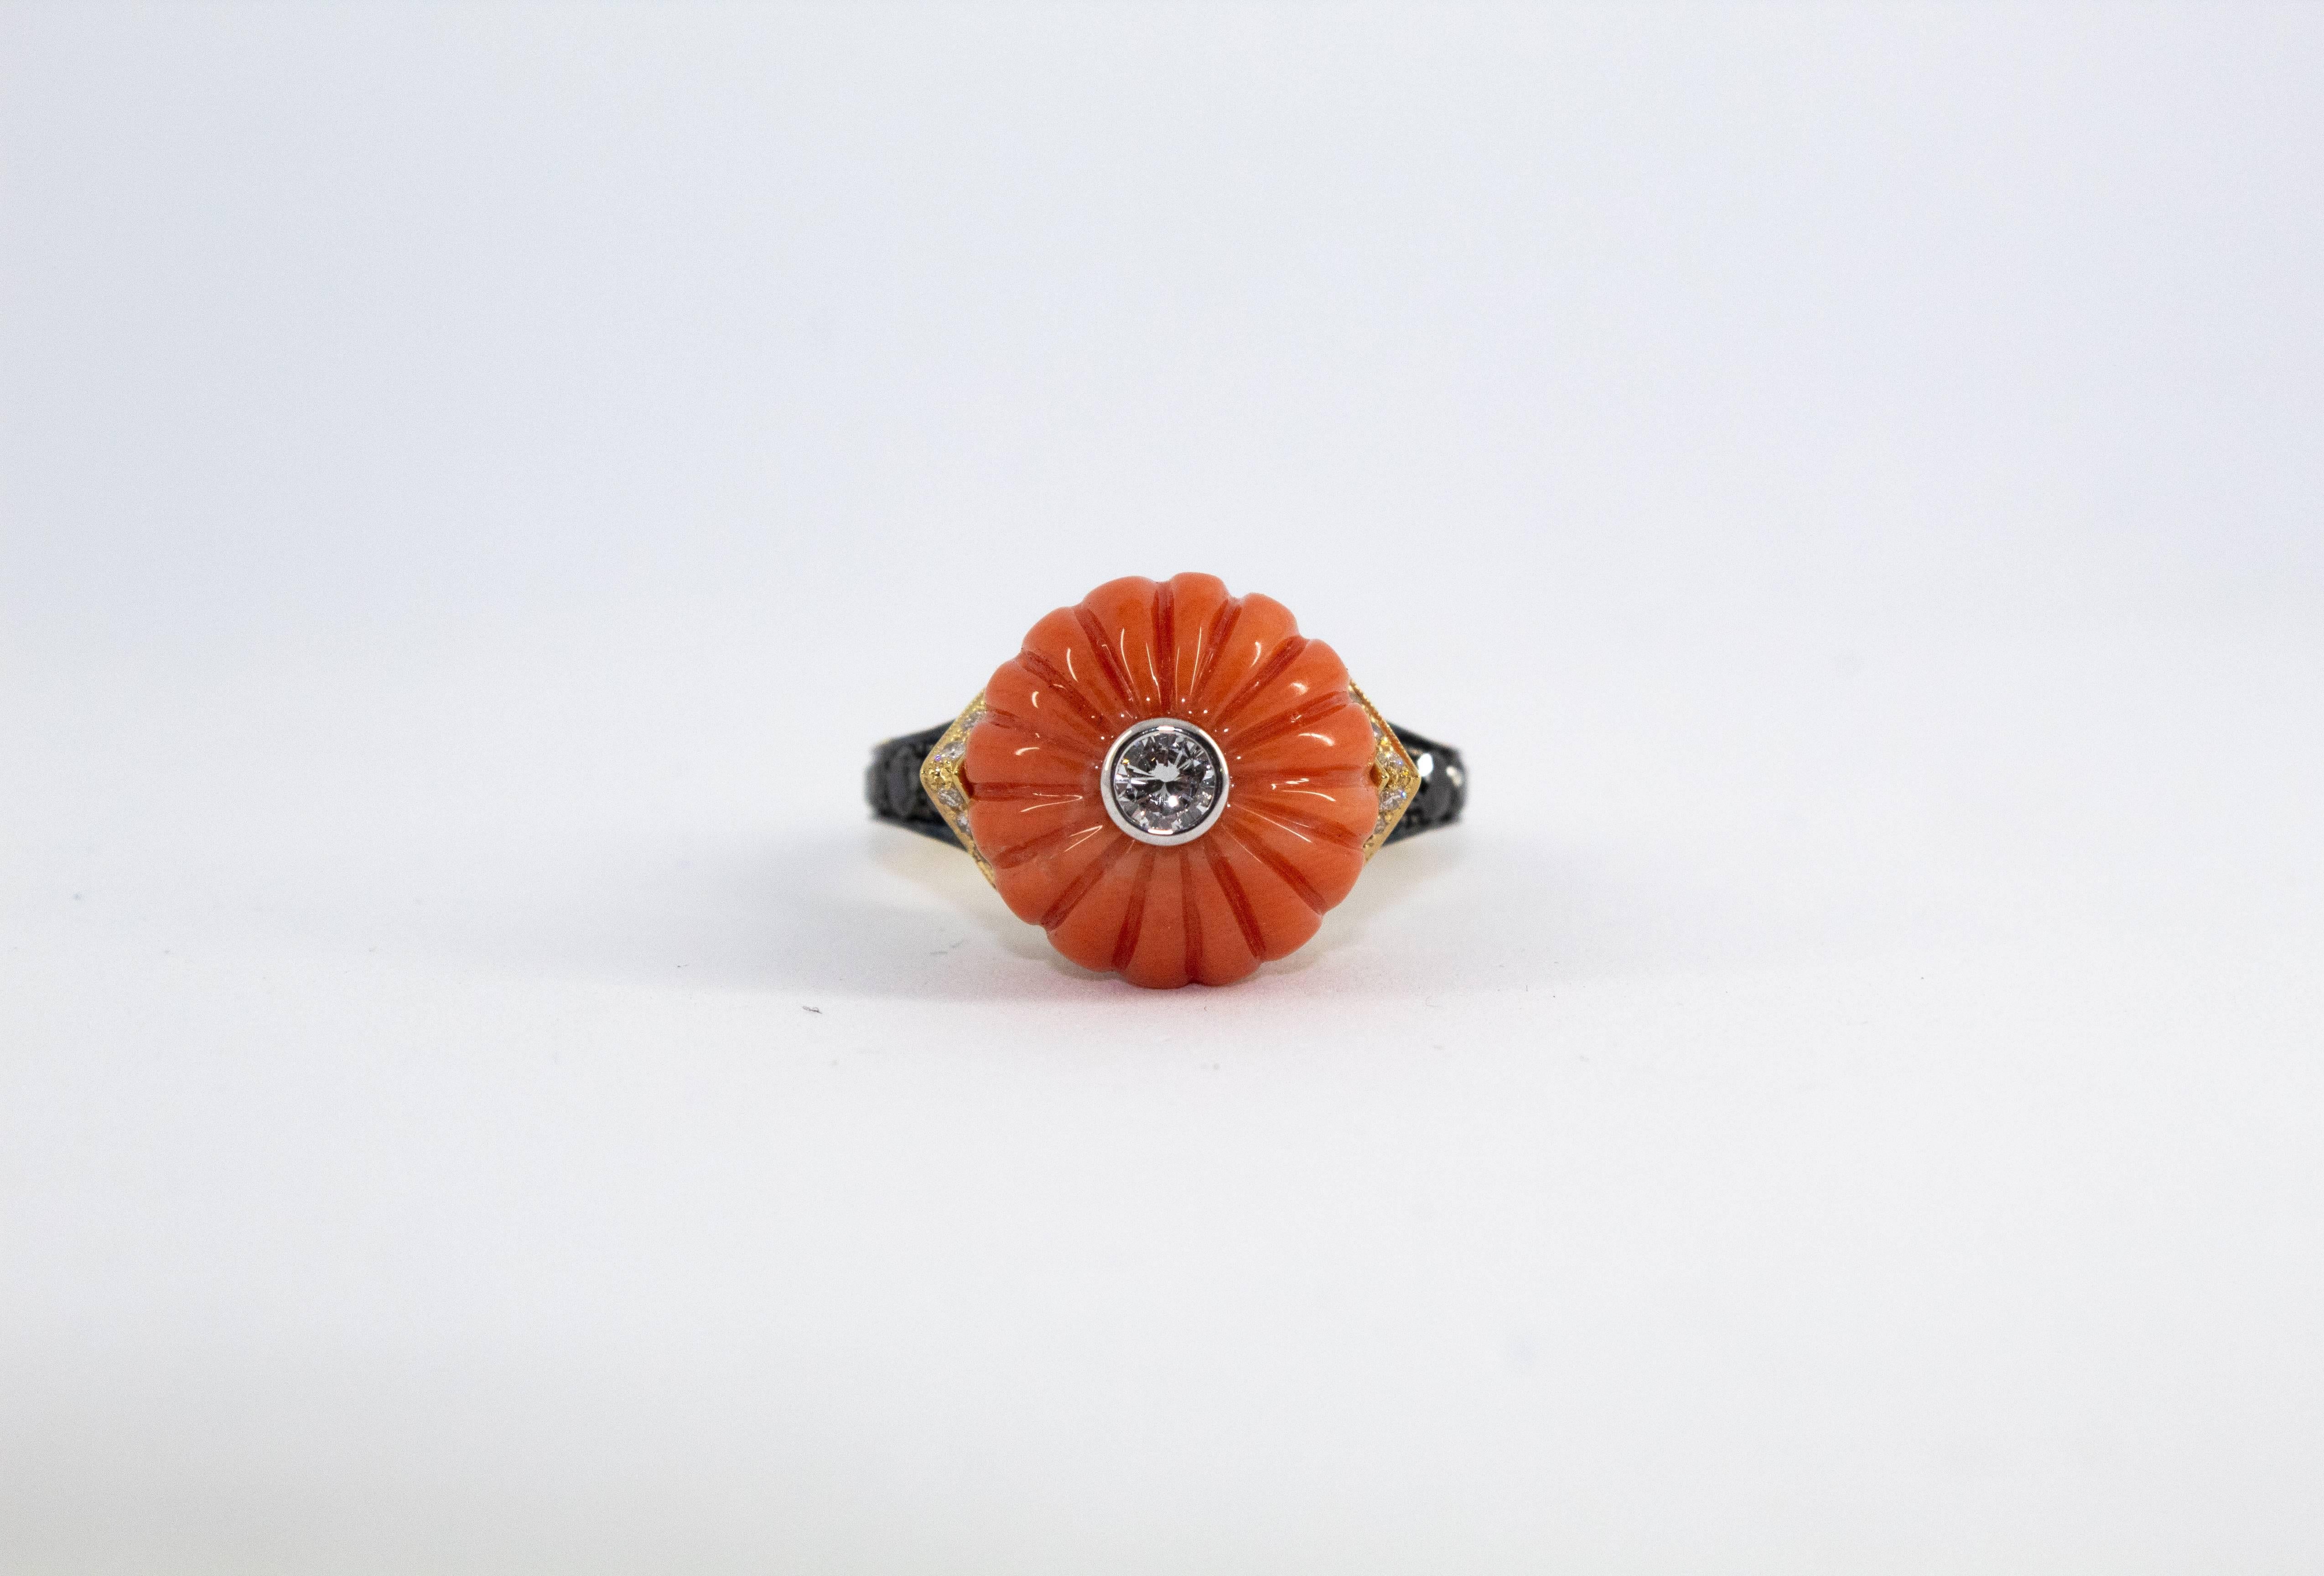 This Ring is made of 18K Yellow Gold.
This Ring has 0.81 Carats of White Diamonds.
This Ring has 1.17 Carats of Black Diamonds.
This Ring has also a Coral.
This Ring is inspired by Renaissance Style.
Size ITA: 17 USA: 8
We're a workshop so every